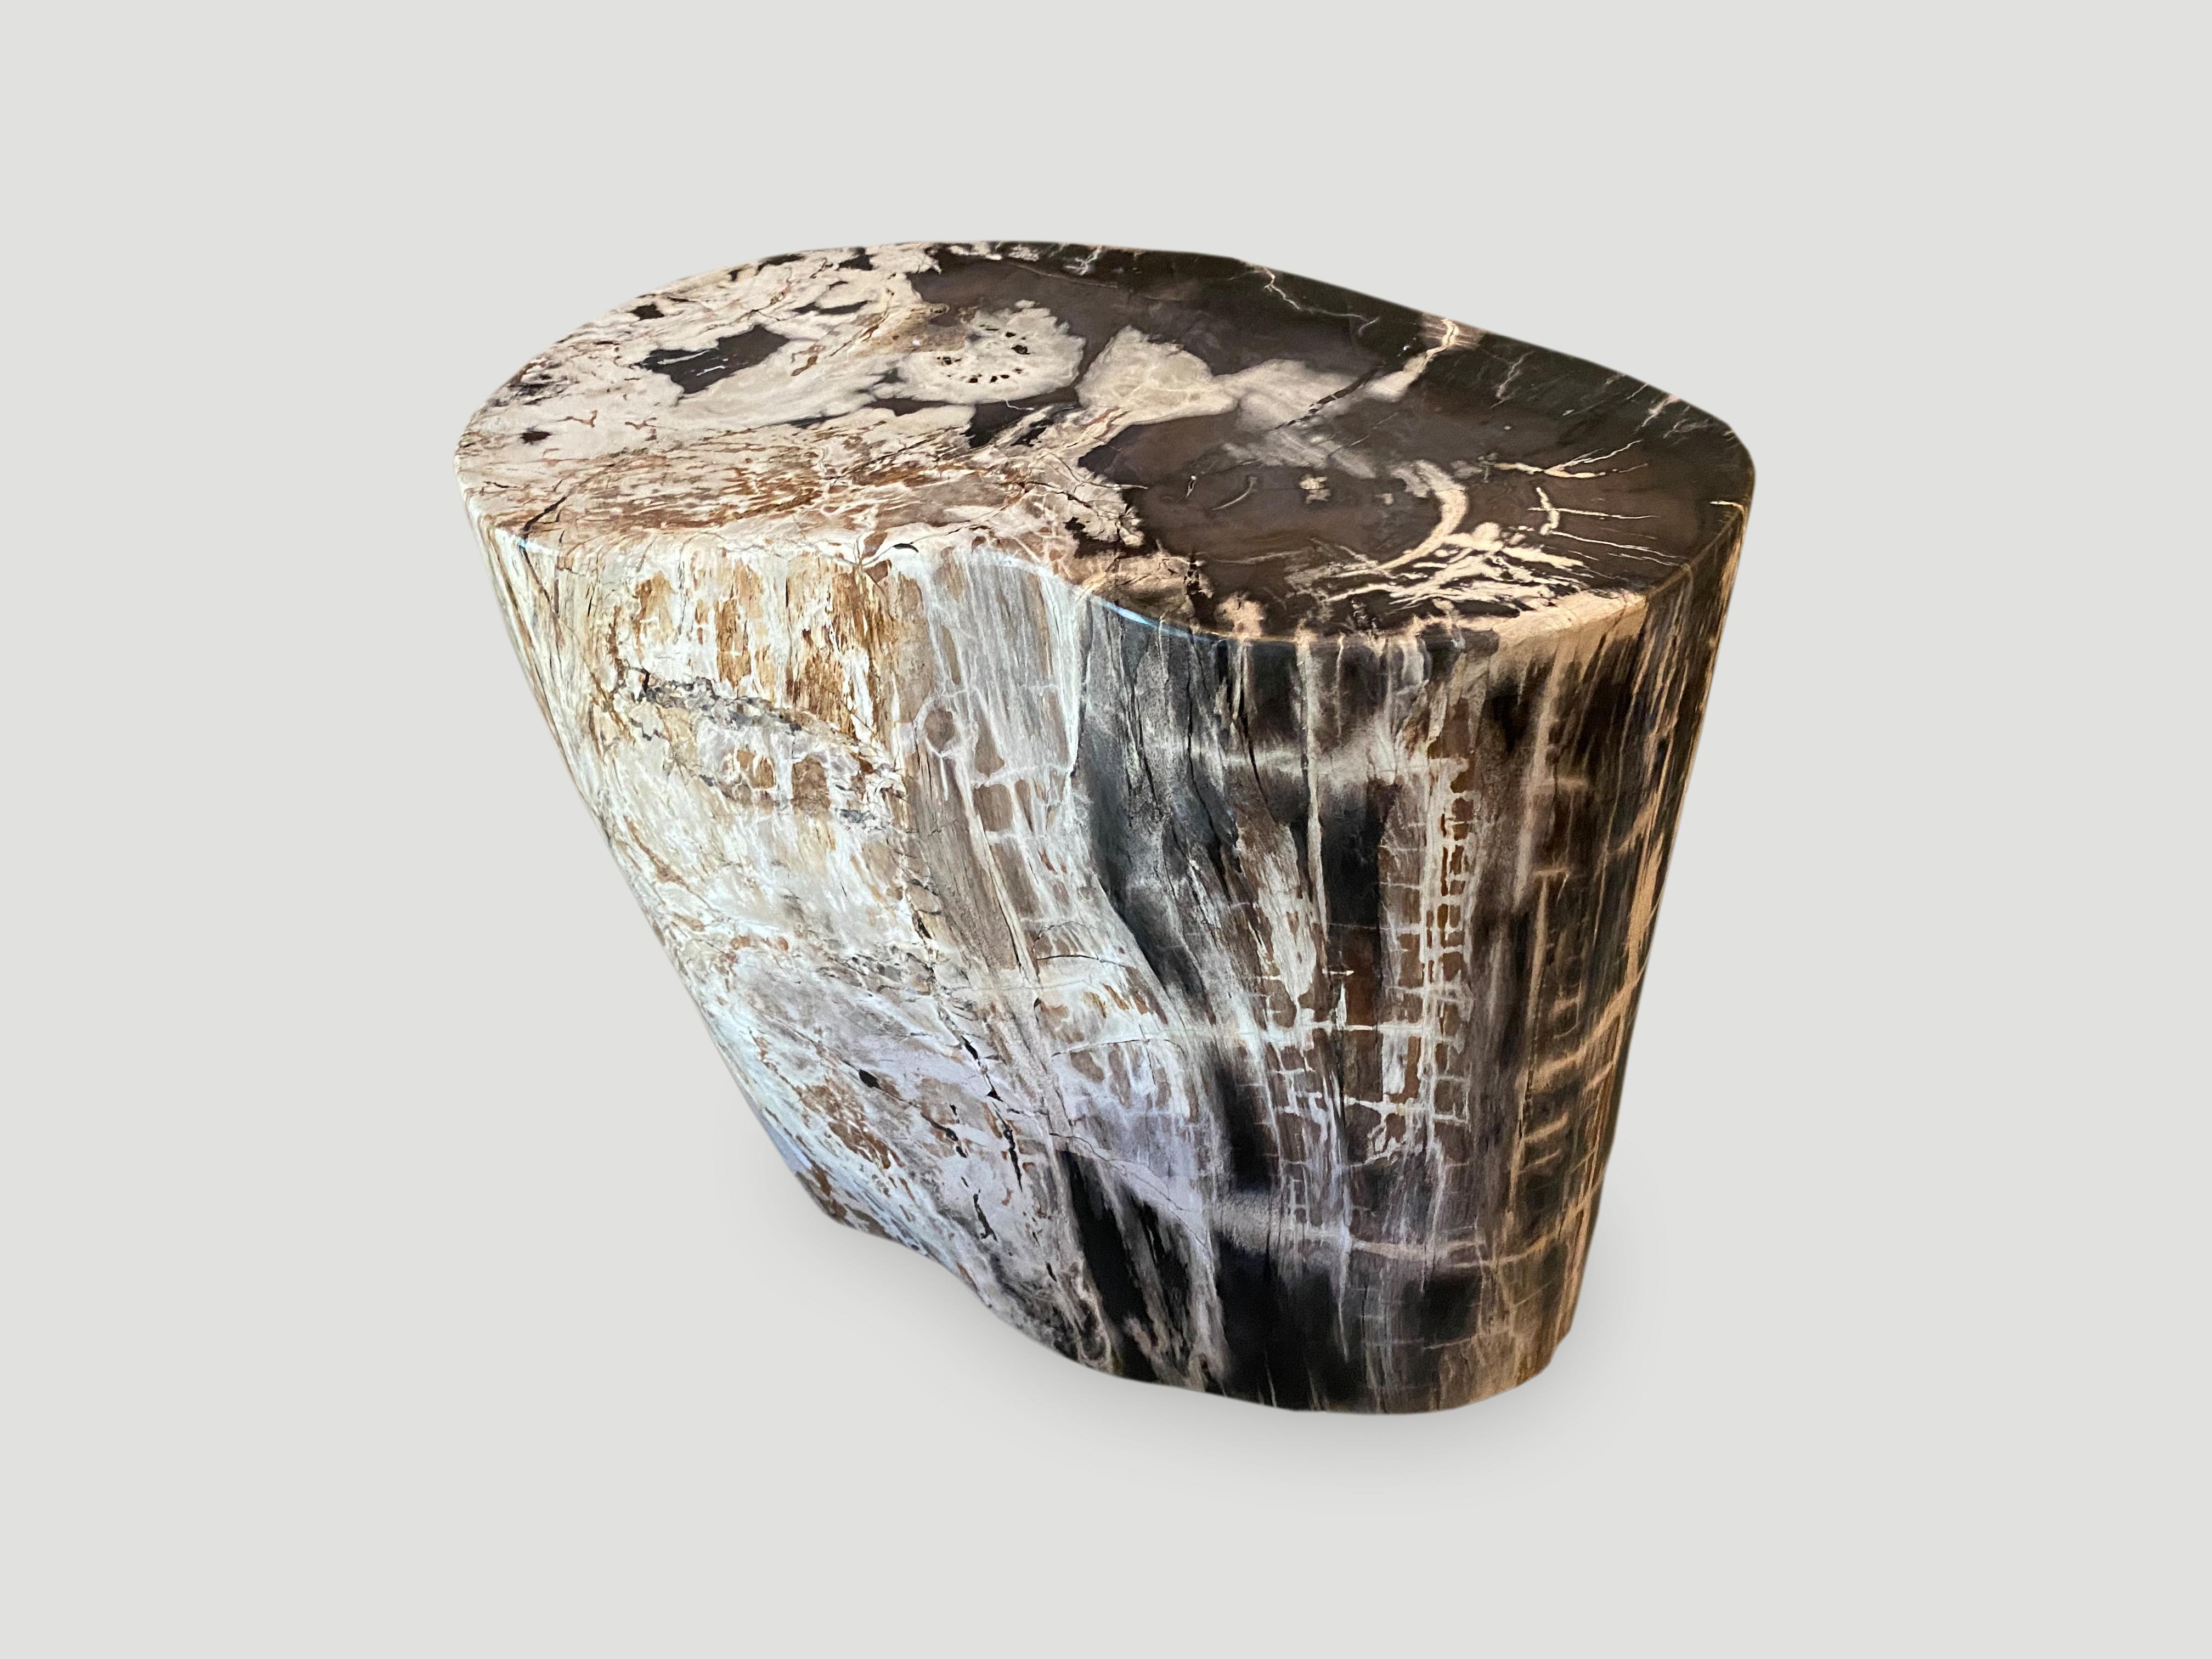 High quality petrified wood side table. This one has beautiful markings and a very usable shape. It’s fascinating how Mother Nature produces these exquisite 40 million year old petrified teak logs with such contrasting colors and natural patterns